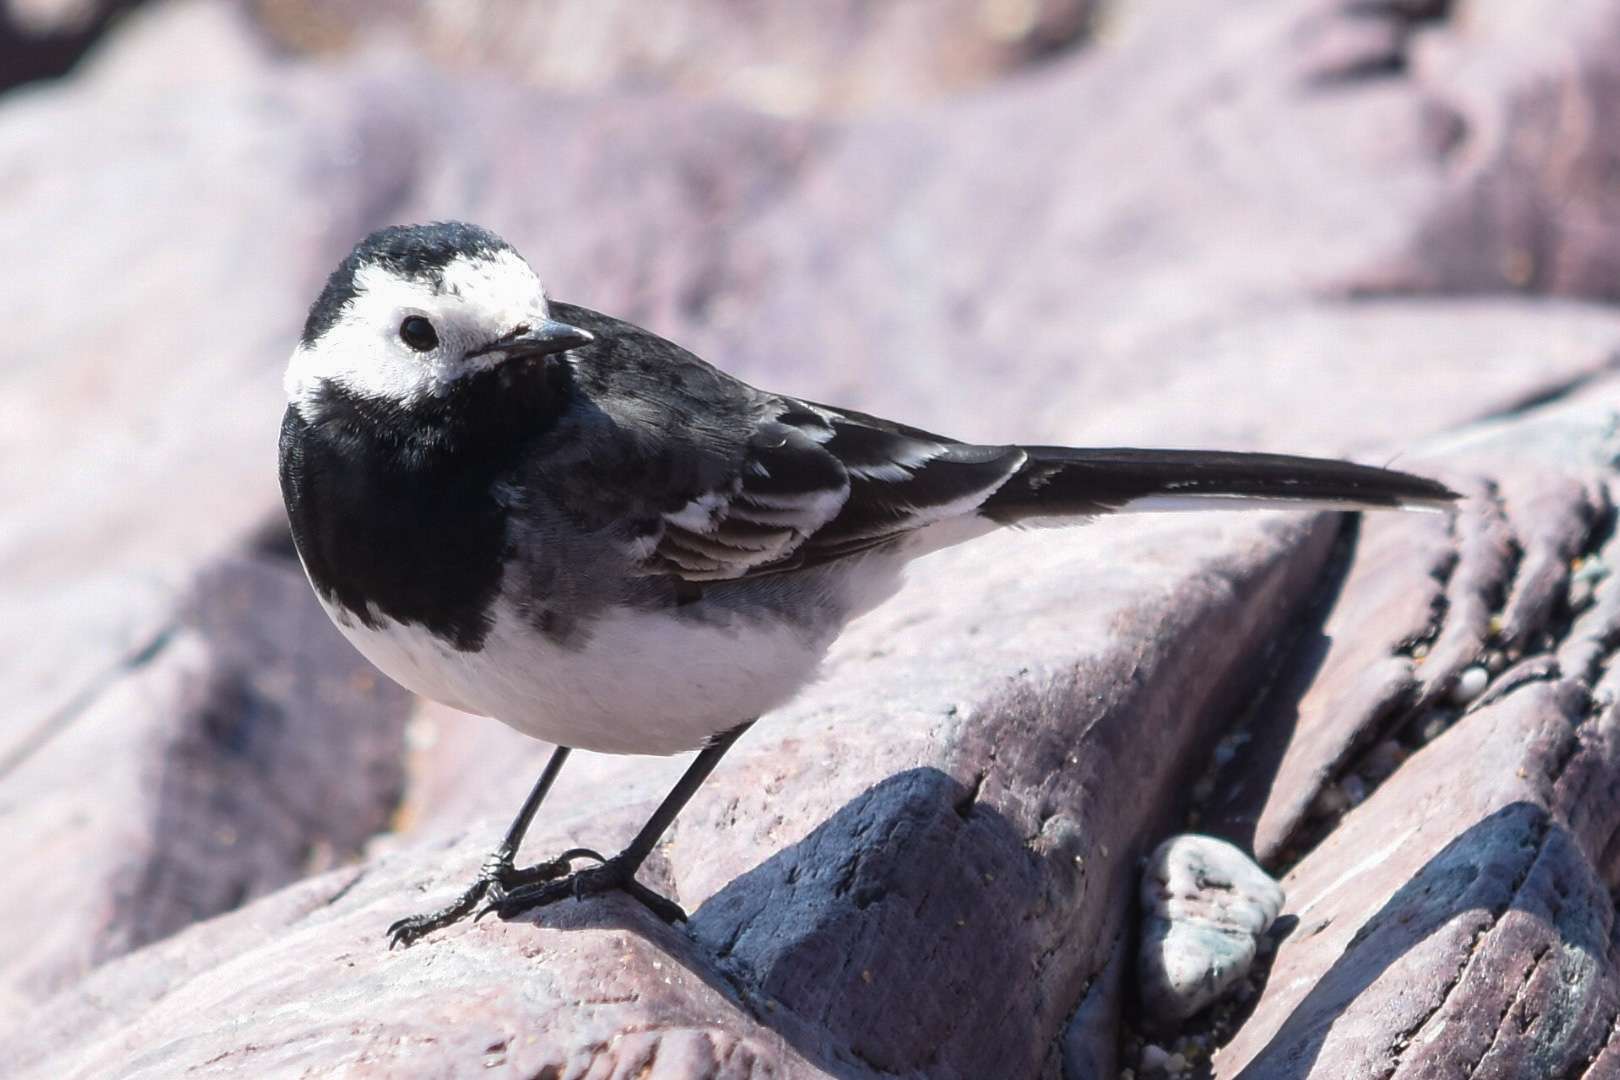 Pied Wagtail by Duncan Leitch at Wembury Point